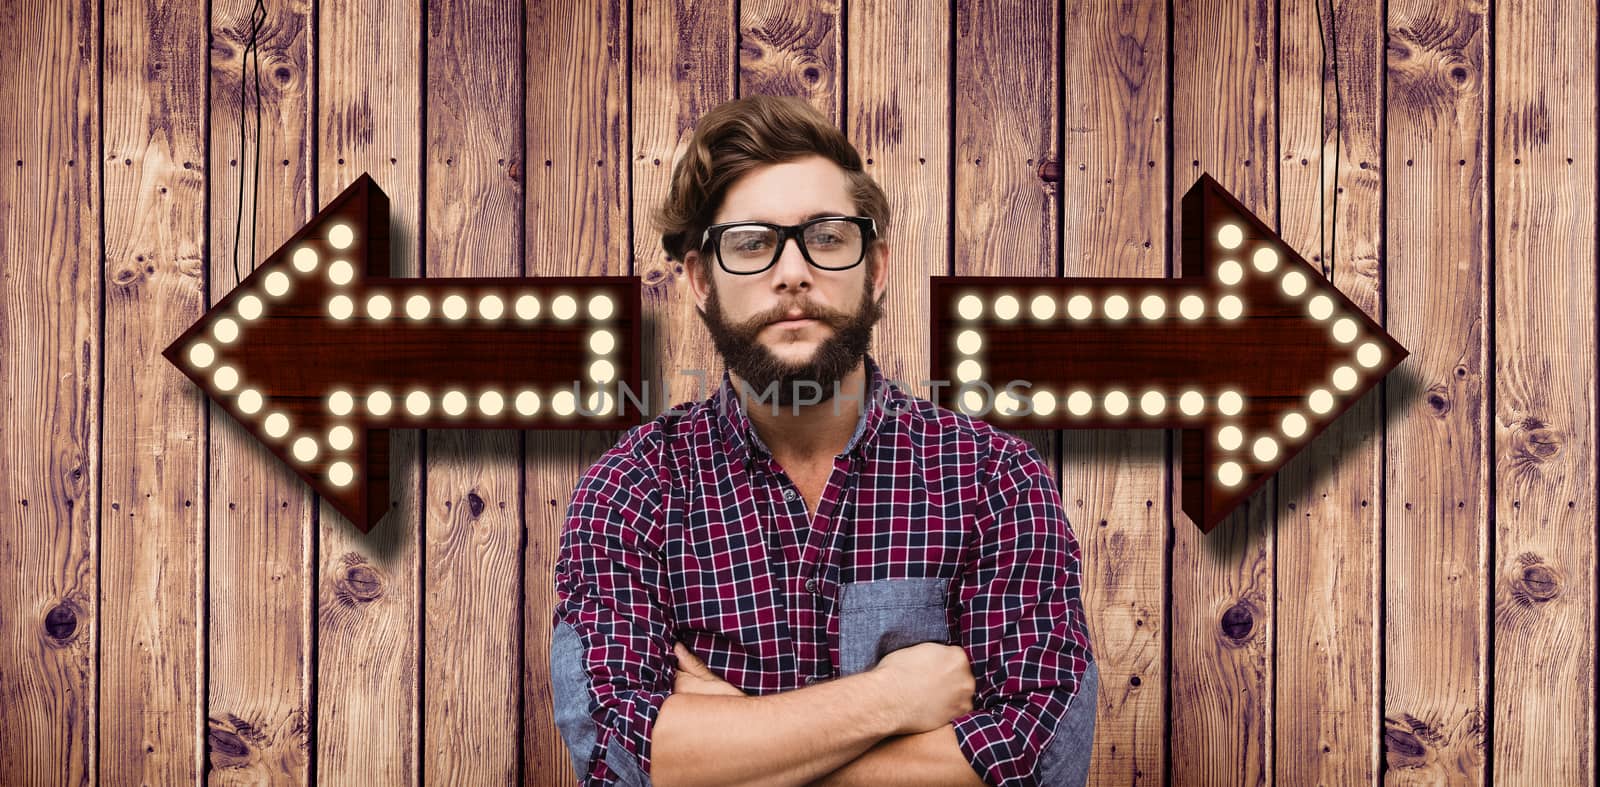 Confident hipster wearing eye glasses with arms crossed against wooden planks background